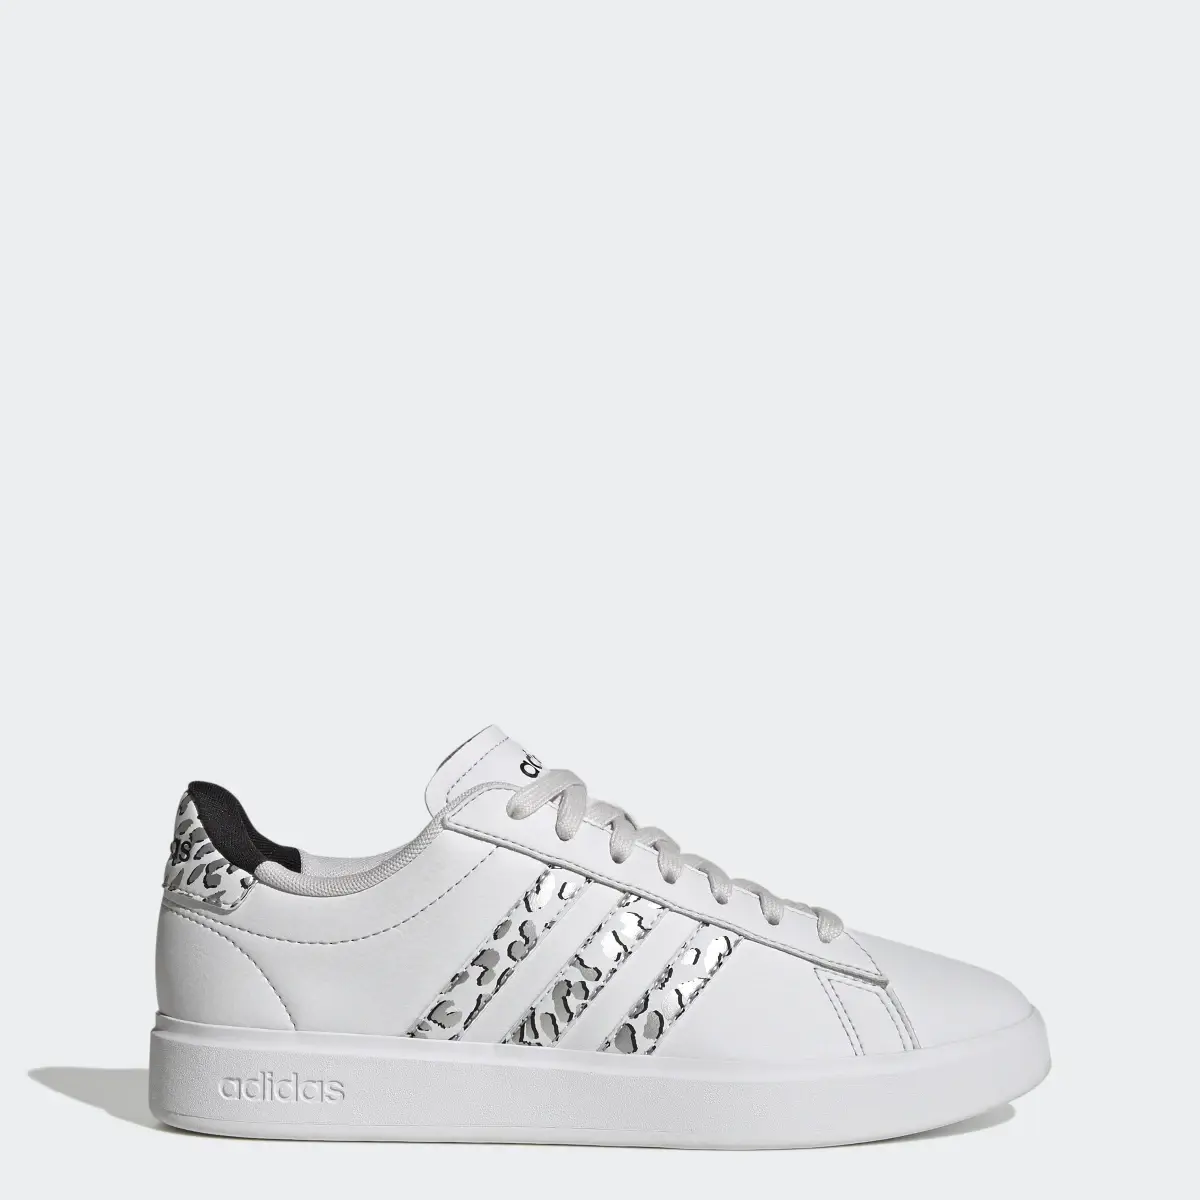 Adidas Grand Court Cloudfoam Lifestyle Court Comfort Style Shoes. 1